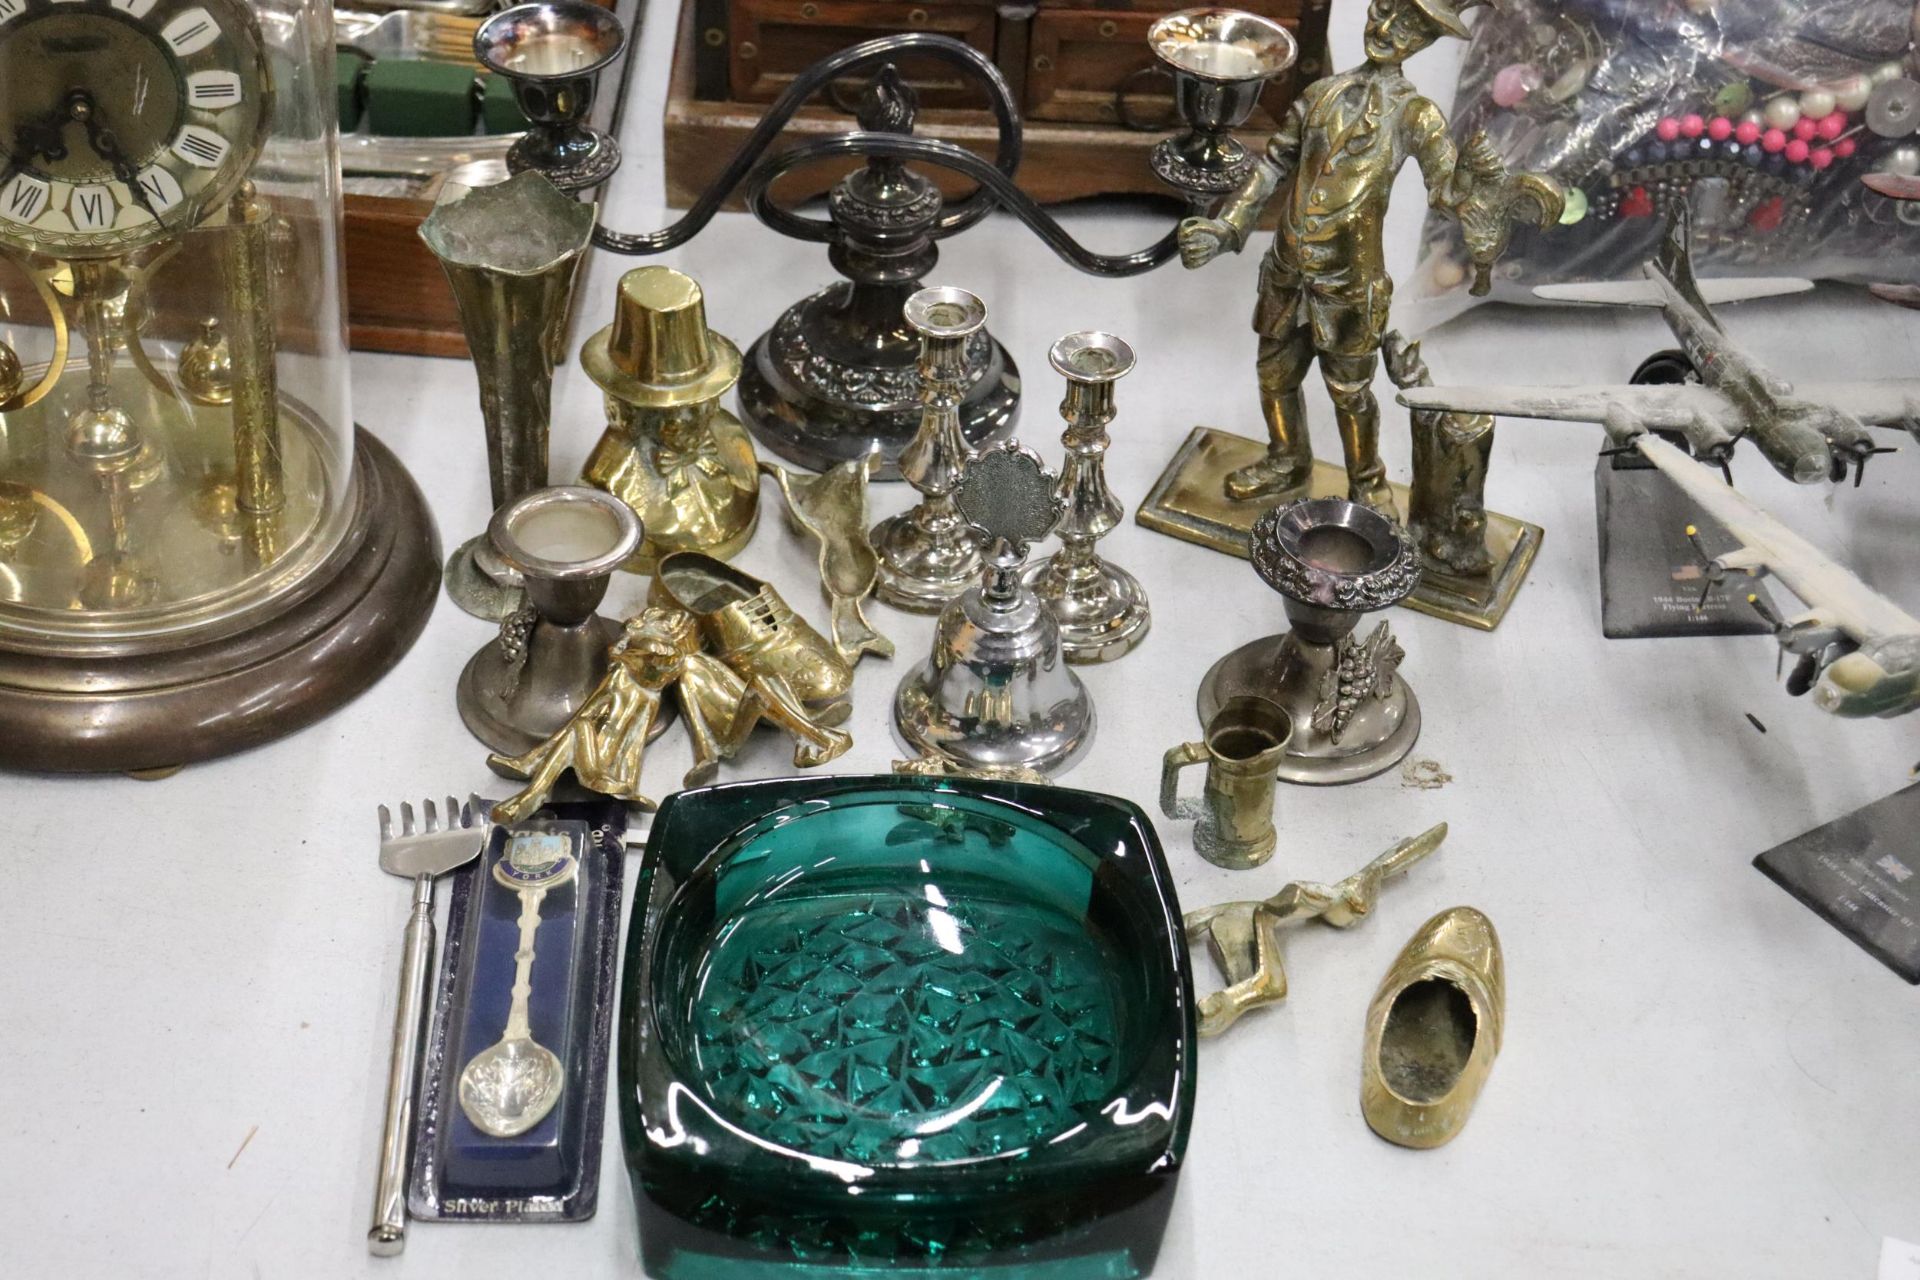 A QUANTITY OF BRASS AND SILVER PLATE TO INCLUDE A HEAVY POACHER FIGURE, CANDLESTICKS, ANIMAL